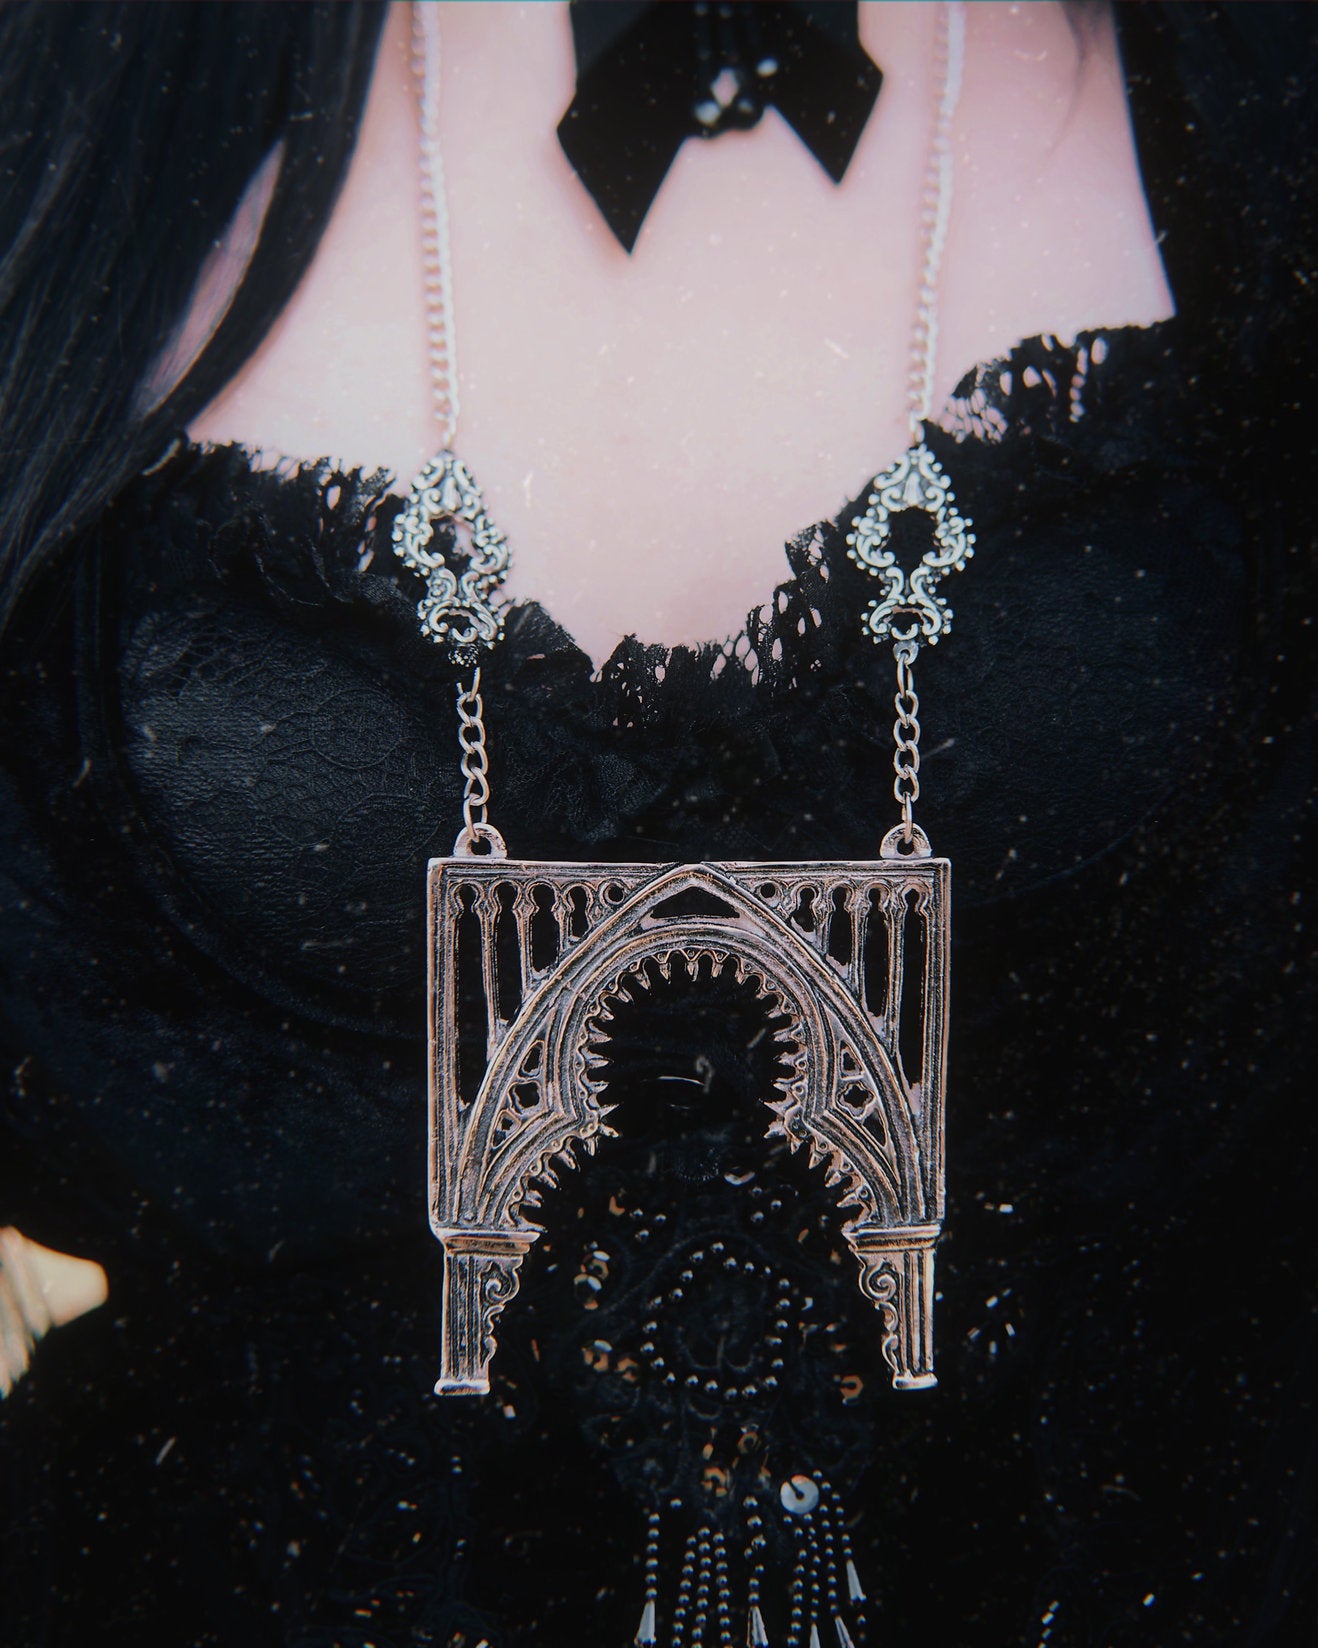 The “Allerdale Arches” Necklace